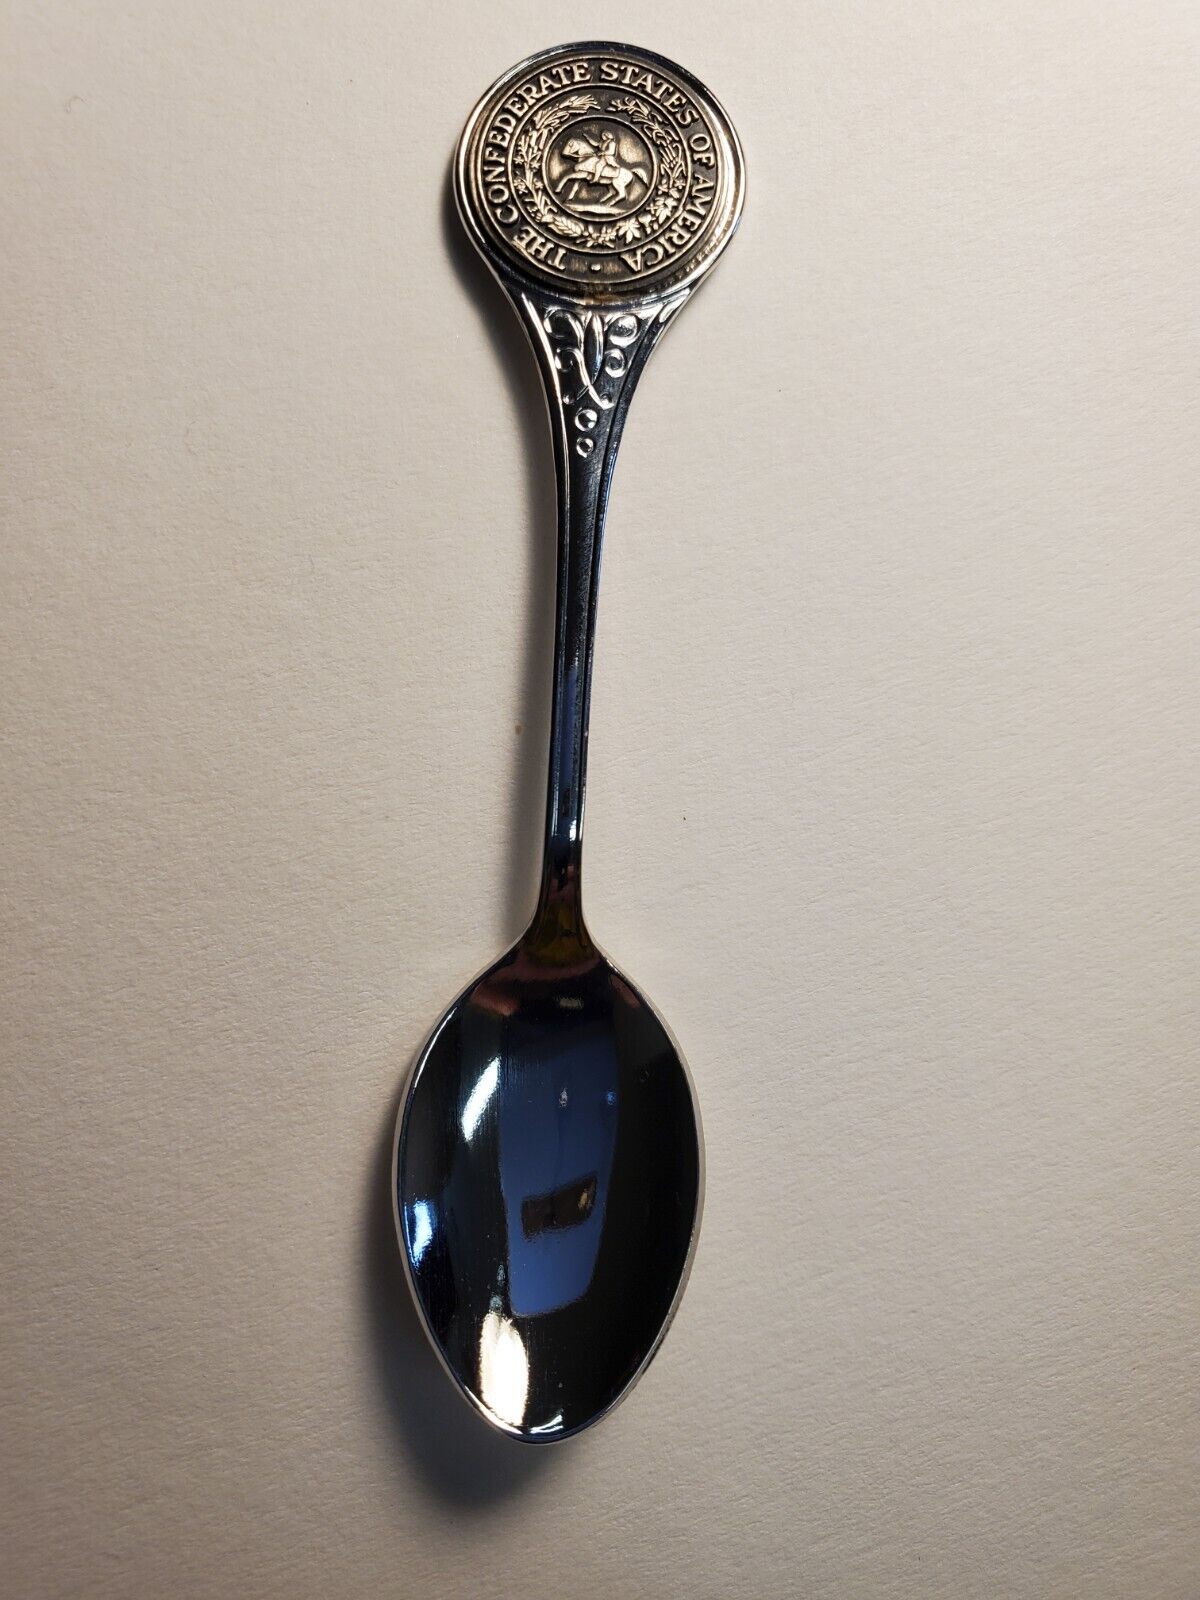 The Confederate States of America souvenir spoon signed Bruce